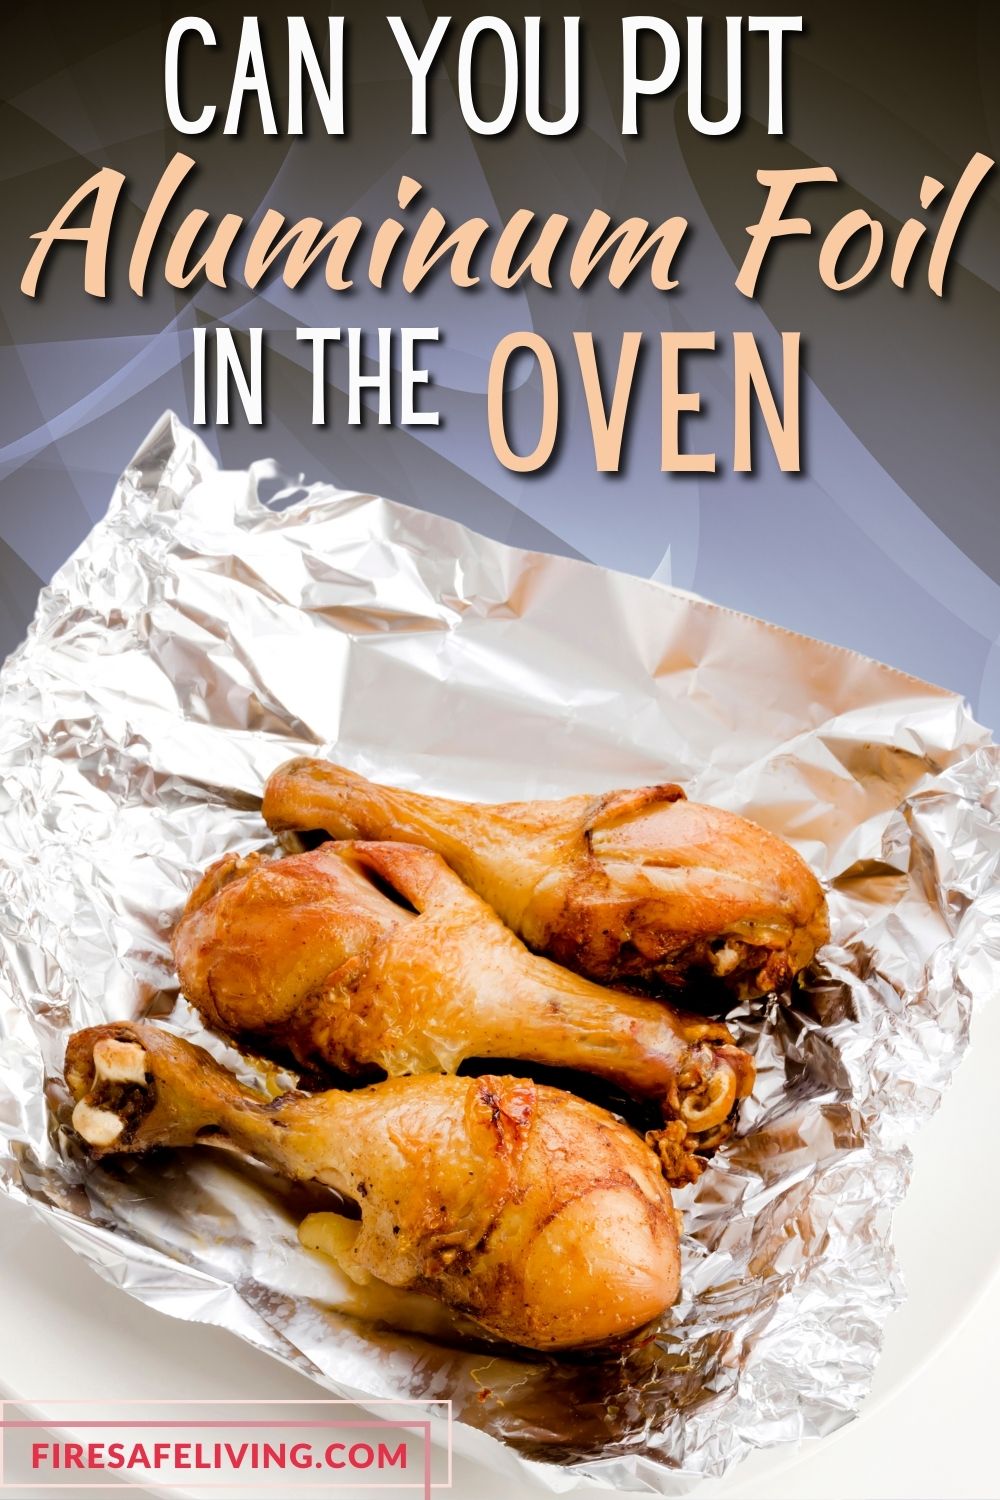 Baked chicken drumstick on an aluminum foil with text overlay that reads Can You Put Aluminum Foil in the Oven with text overlay tht reads Can You Put Aluminum Foil in the Oven